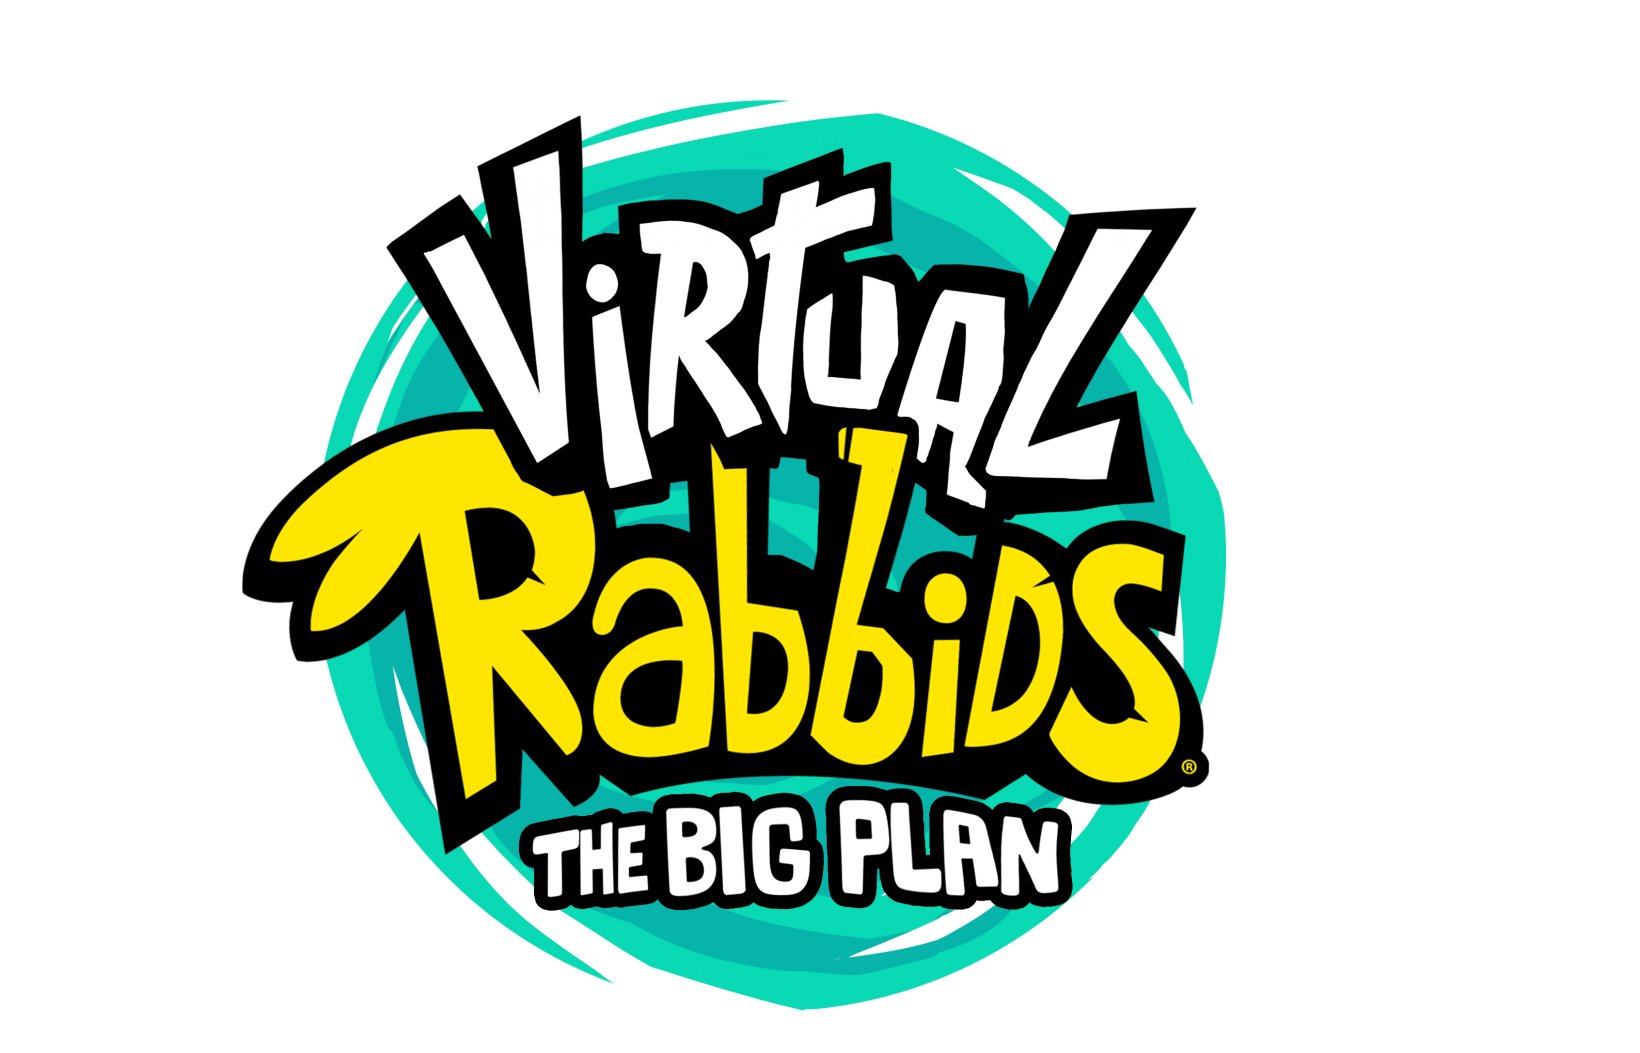 Virtual Rabbids: The Big Plan is Ubisoft's first Daydream experience